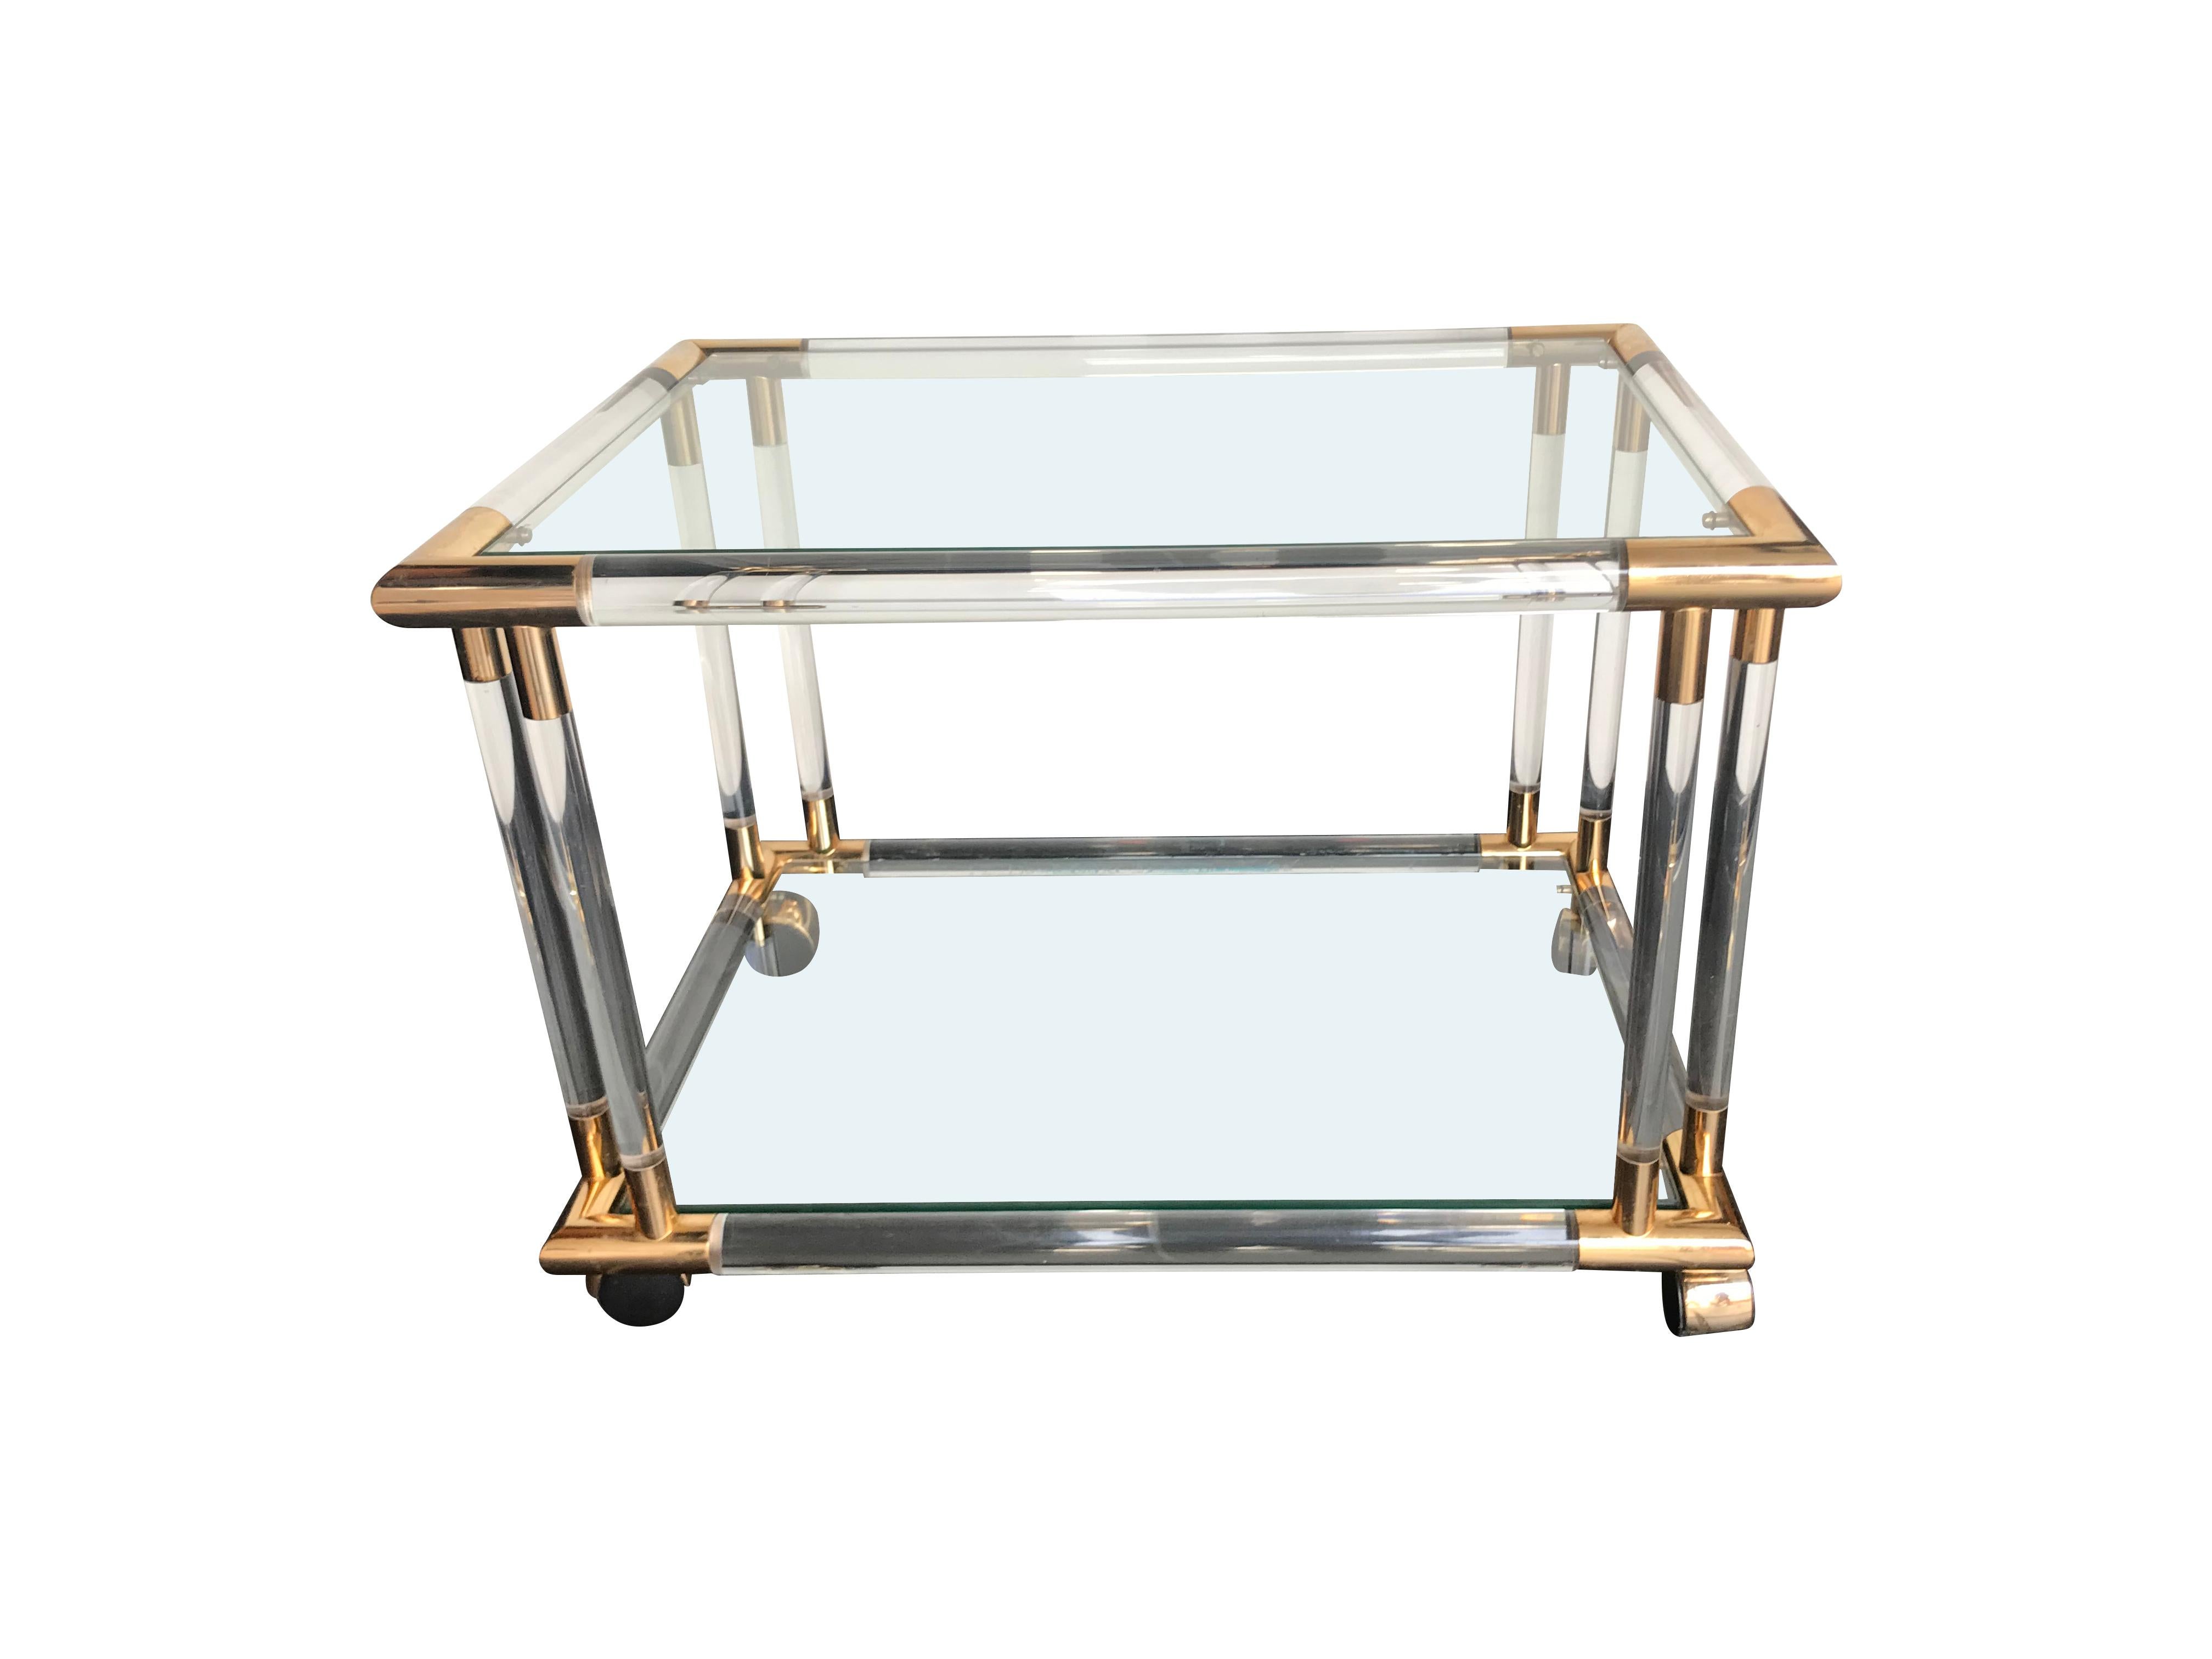 An Art Deco style Lucite and brass bar trolley / side table with 2 glass shelves, on brass castors. A lovely quality made piece with thick Lucite frame.